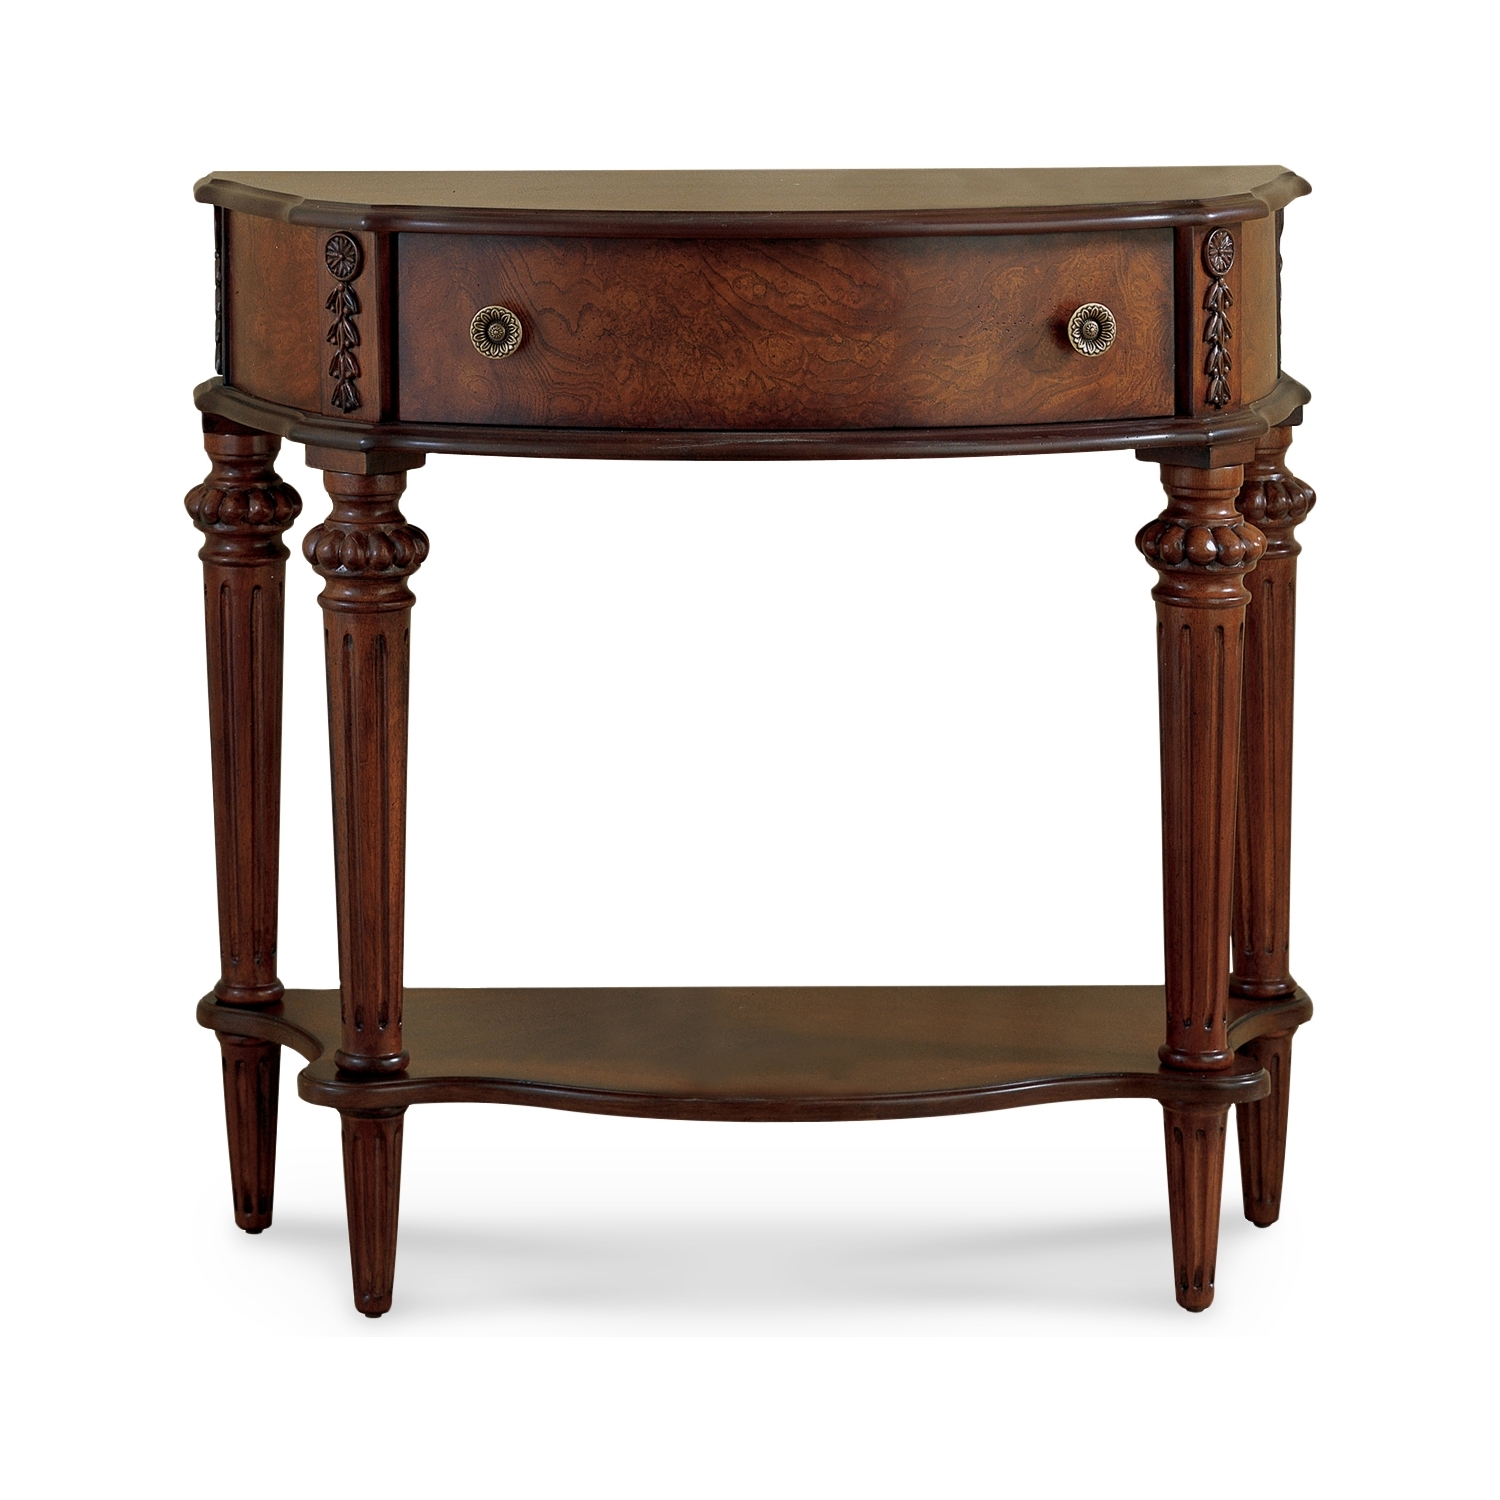 Butler specialty plantation cherry half round console and sofa table